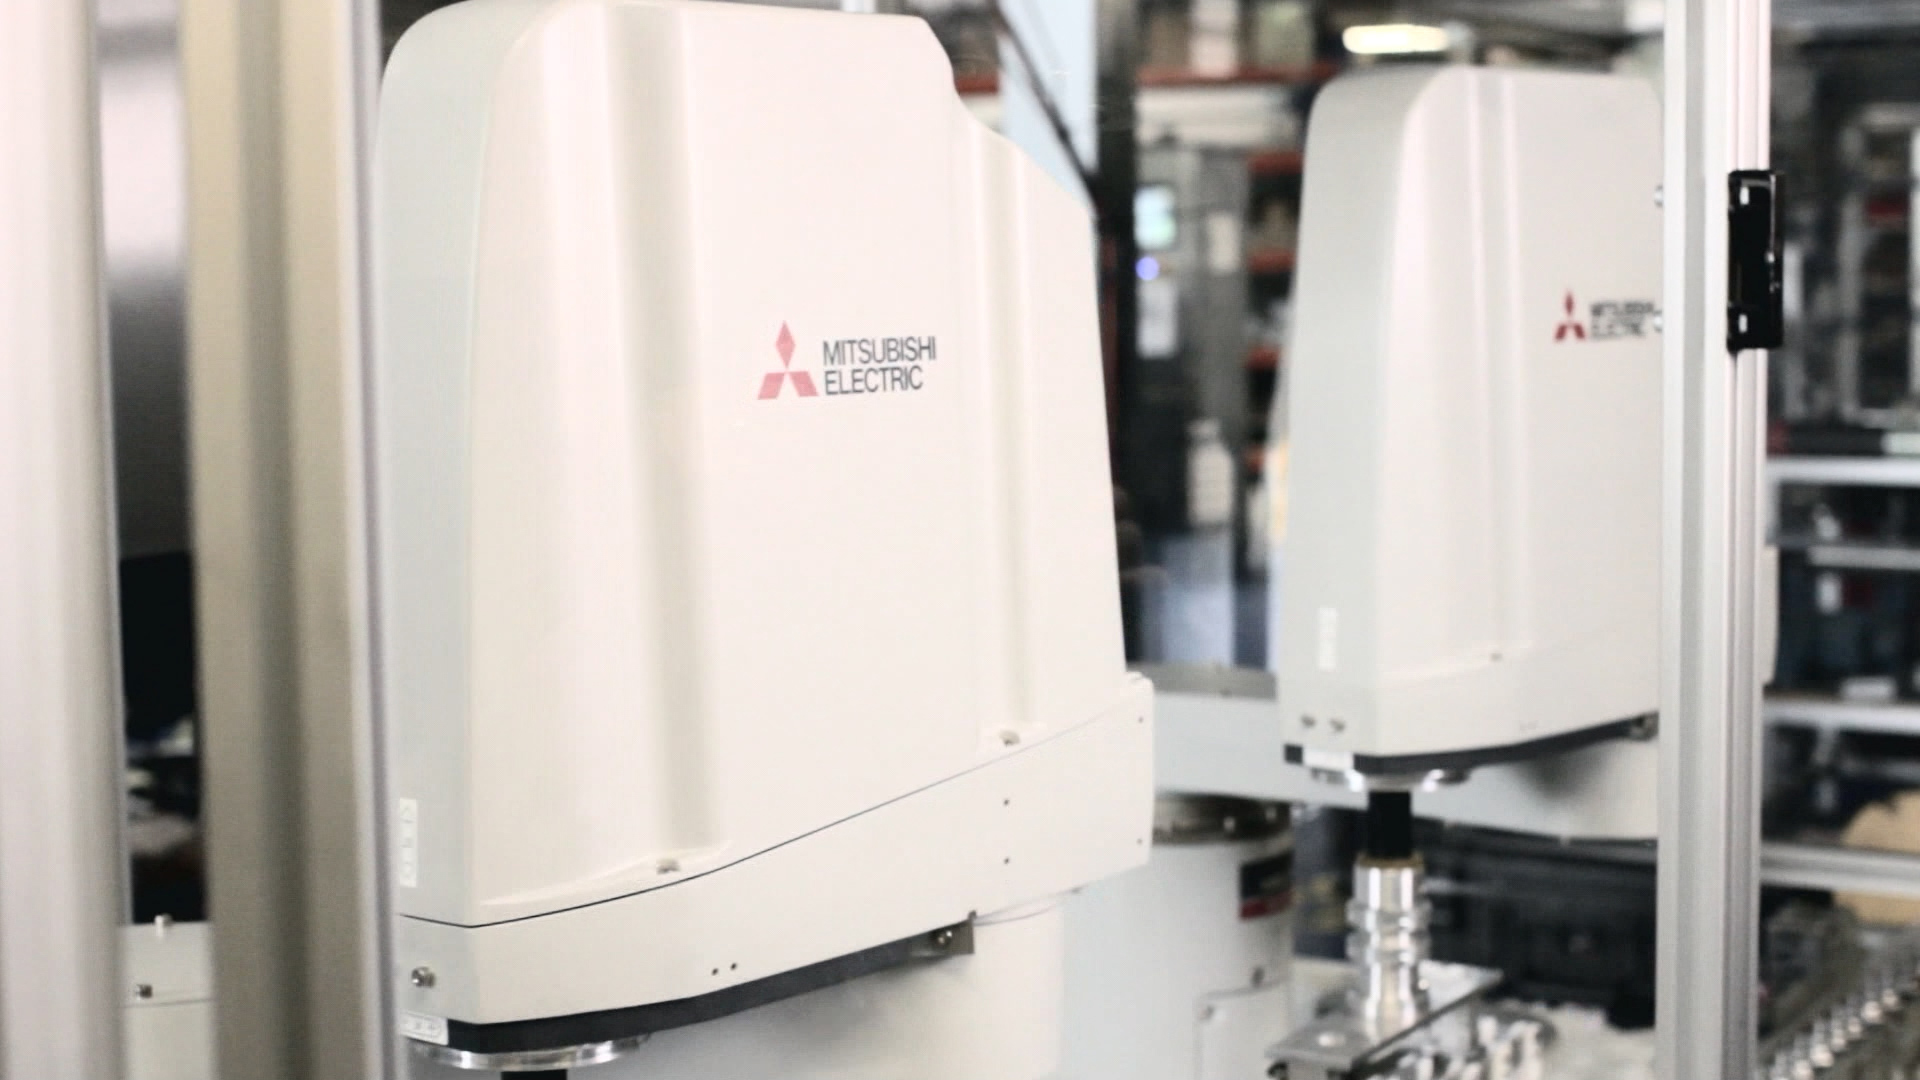 Mitsubishi Electric offers very reliable and accomplished small robots which are easy to synchronise and control, using powerful controllers and intuitive software. [Source: Mitsubishi Electric Europe B.V.]